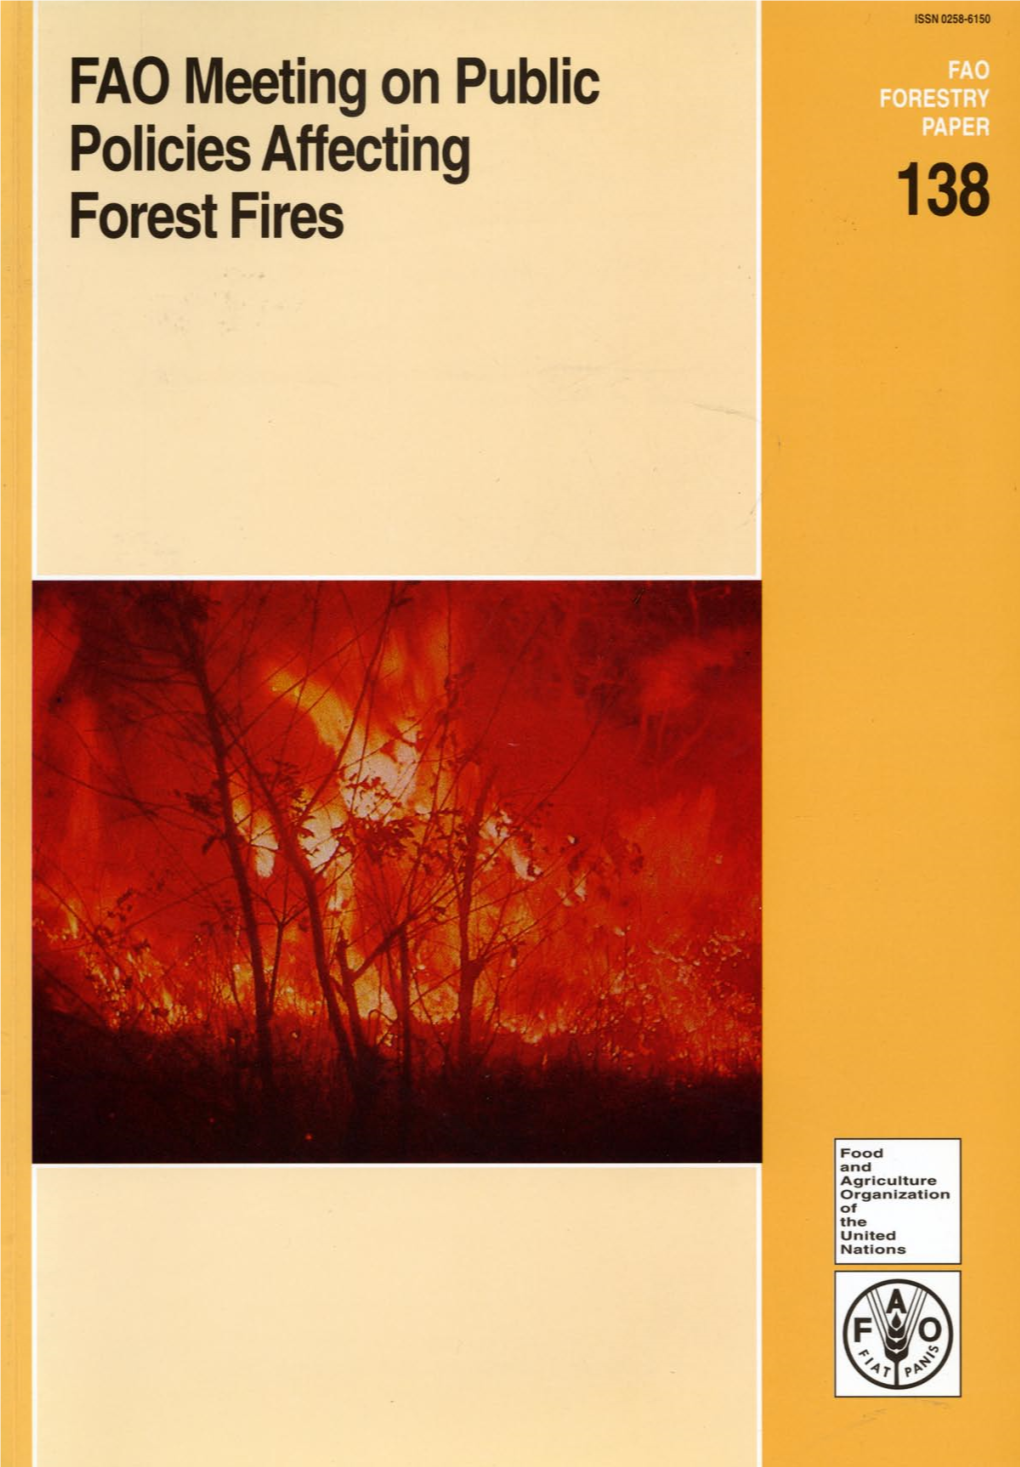 Forest Fires, and Direct Advice to Member Countries